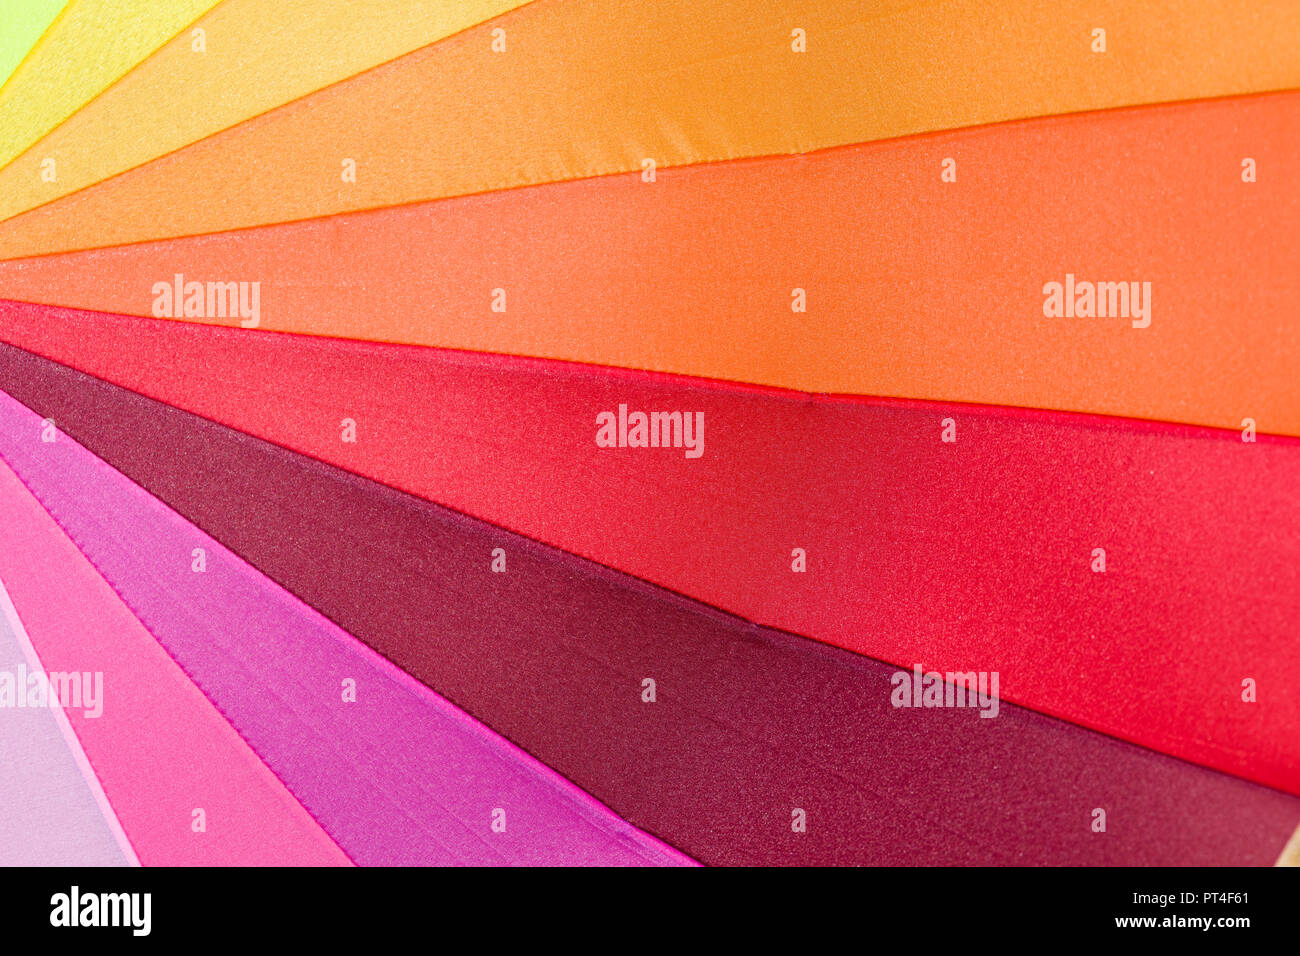 Abstract geometric triangle pattern in bright rainbow multiple colors Stock Photo